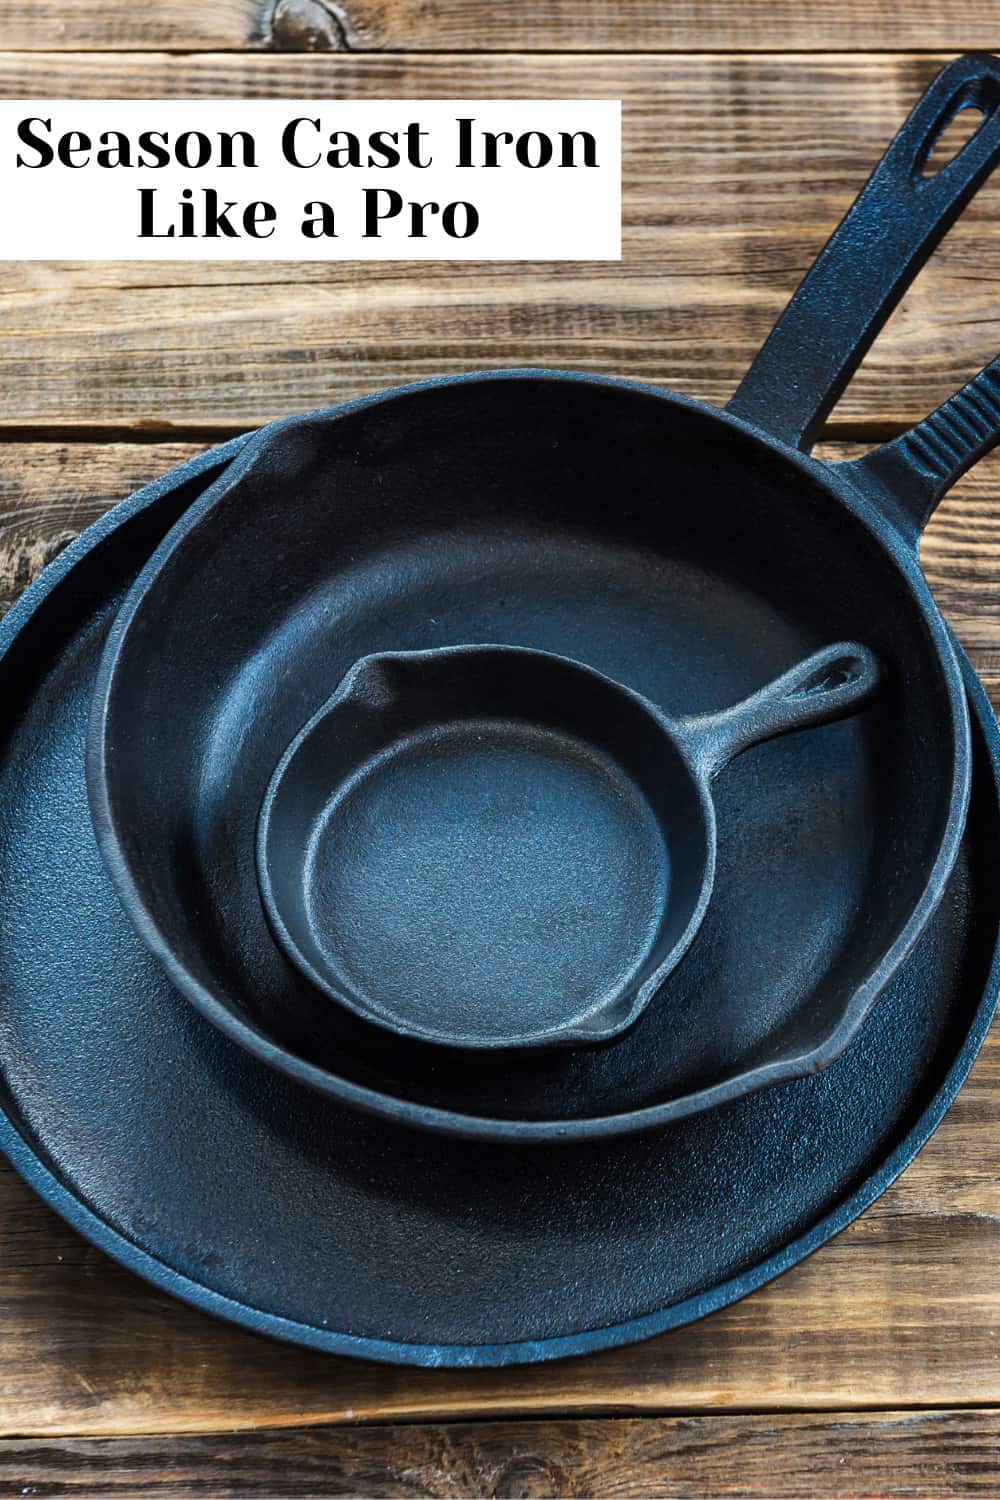 Master the art of seasoning your cast iron cookware.